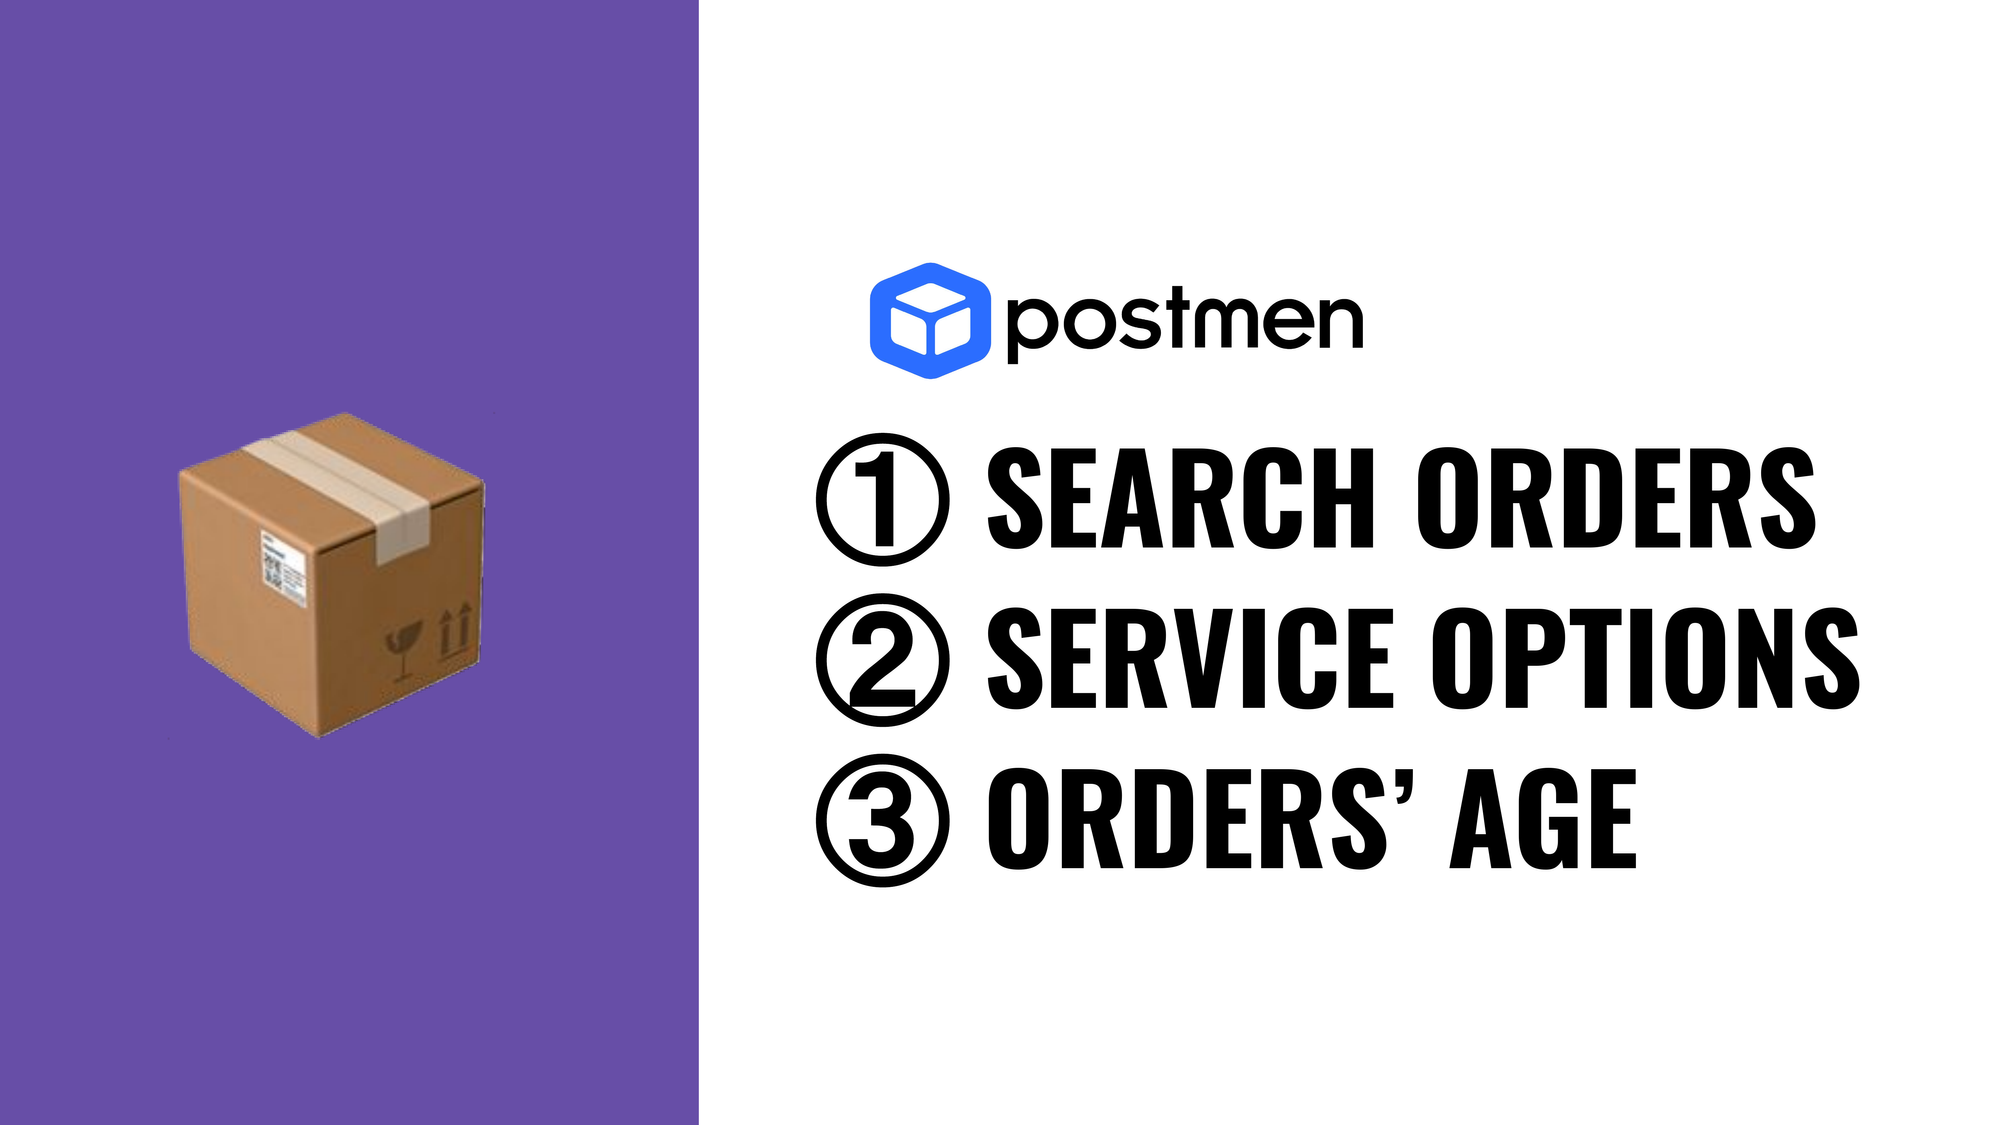 Ship Shopify orders better with new Postmen features: Order age, search bar, service options